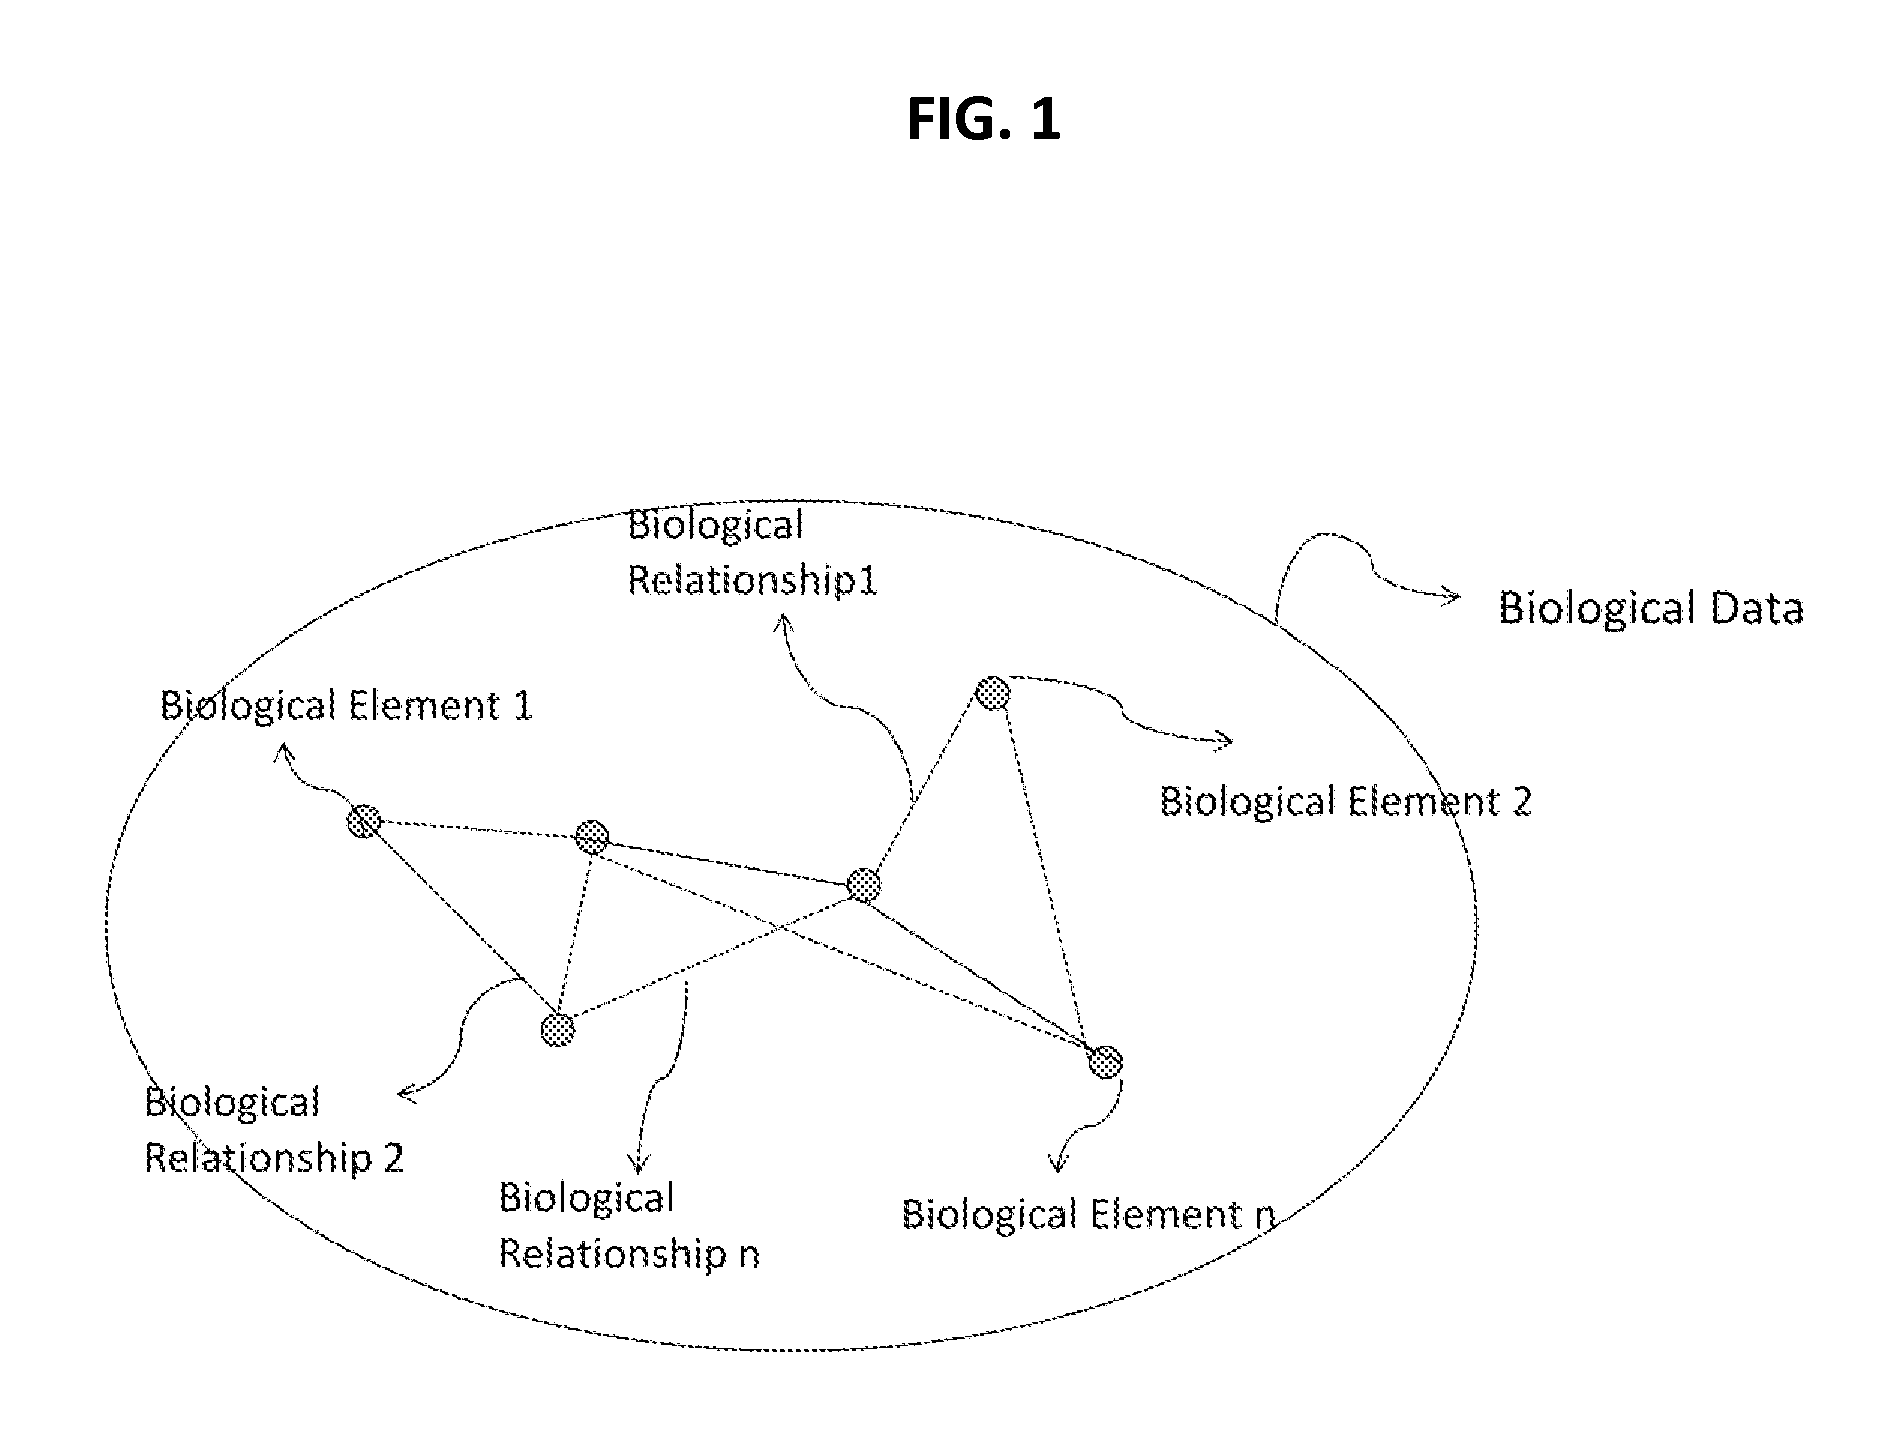 Methods and systems for identifying molecules or processes of biological interest by using knowledge discovery in biological data